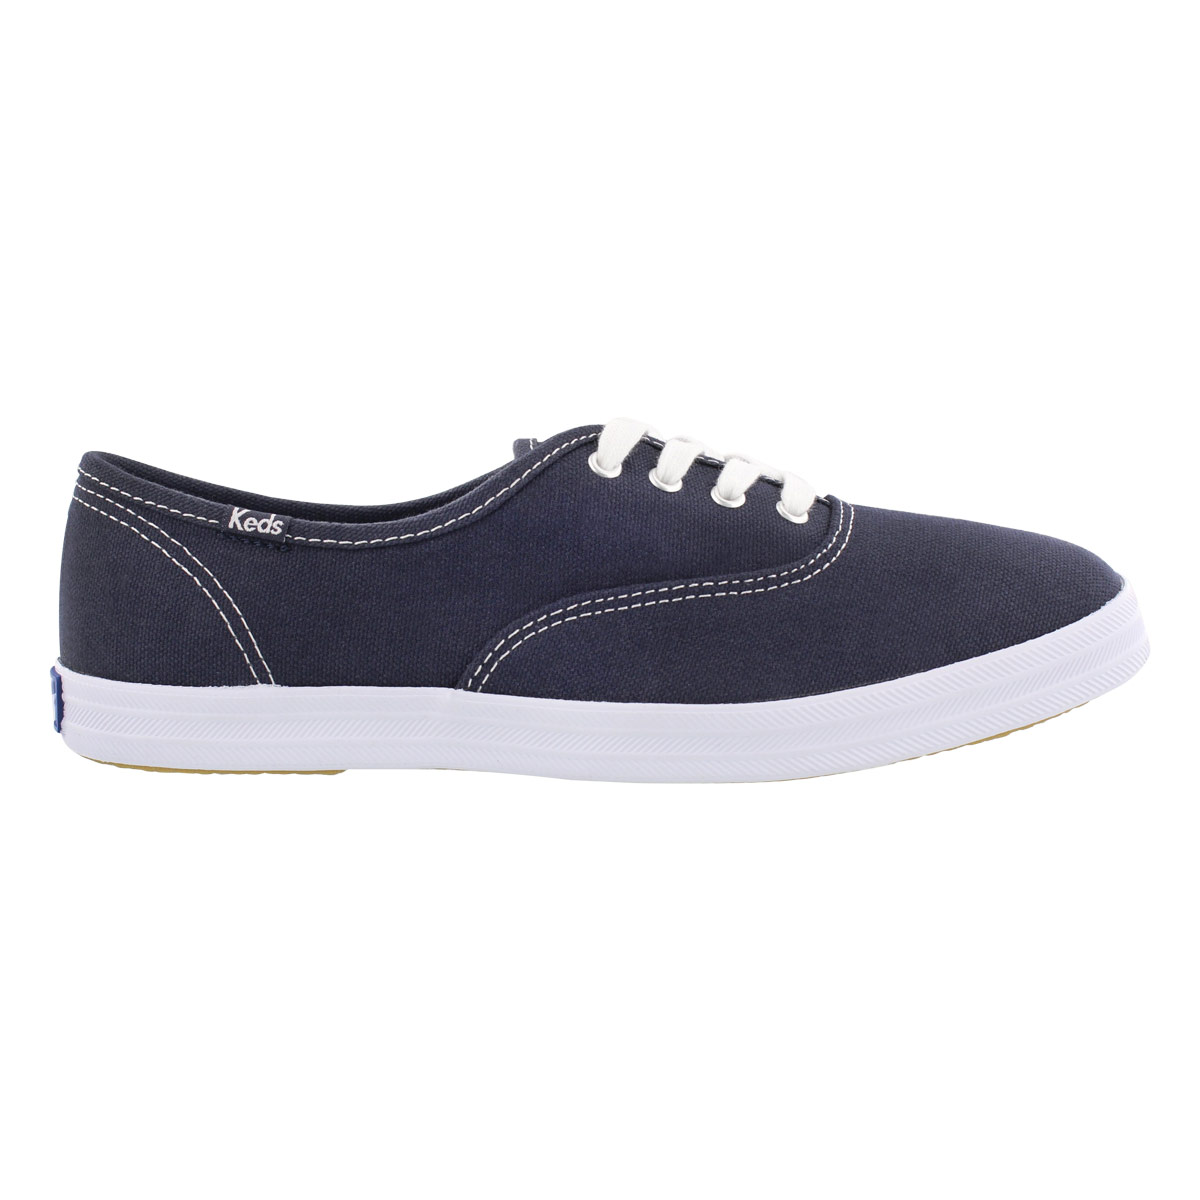 Keds Women's CHAMPION OXFORD navy CVO sneakers